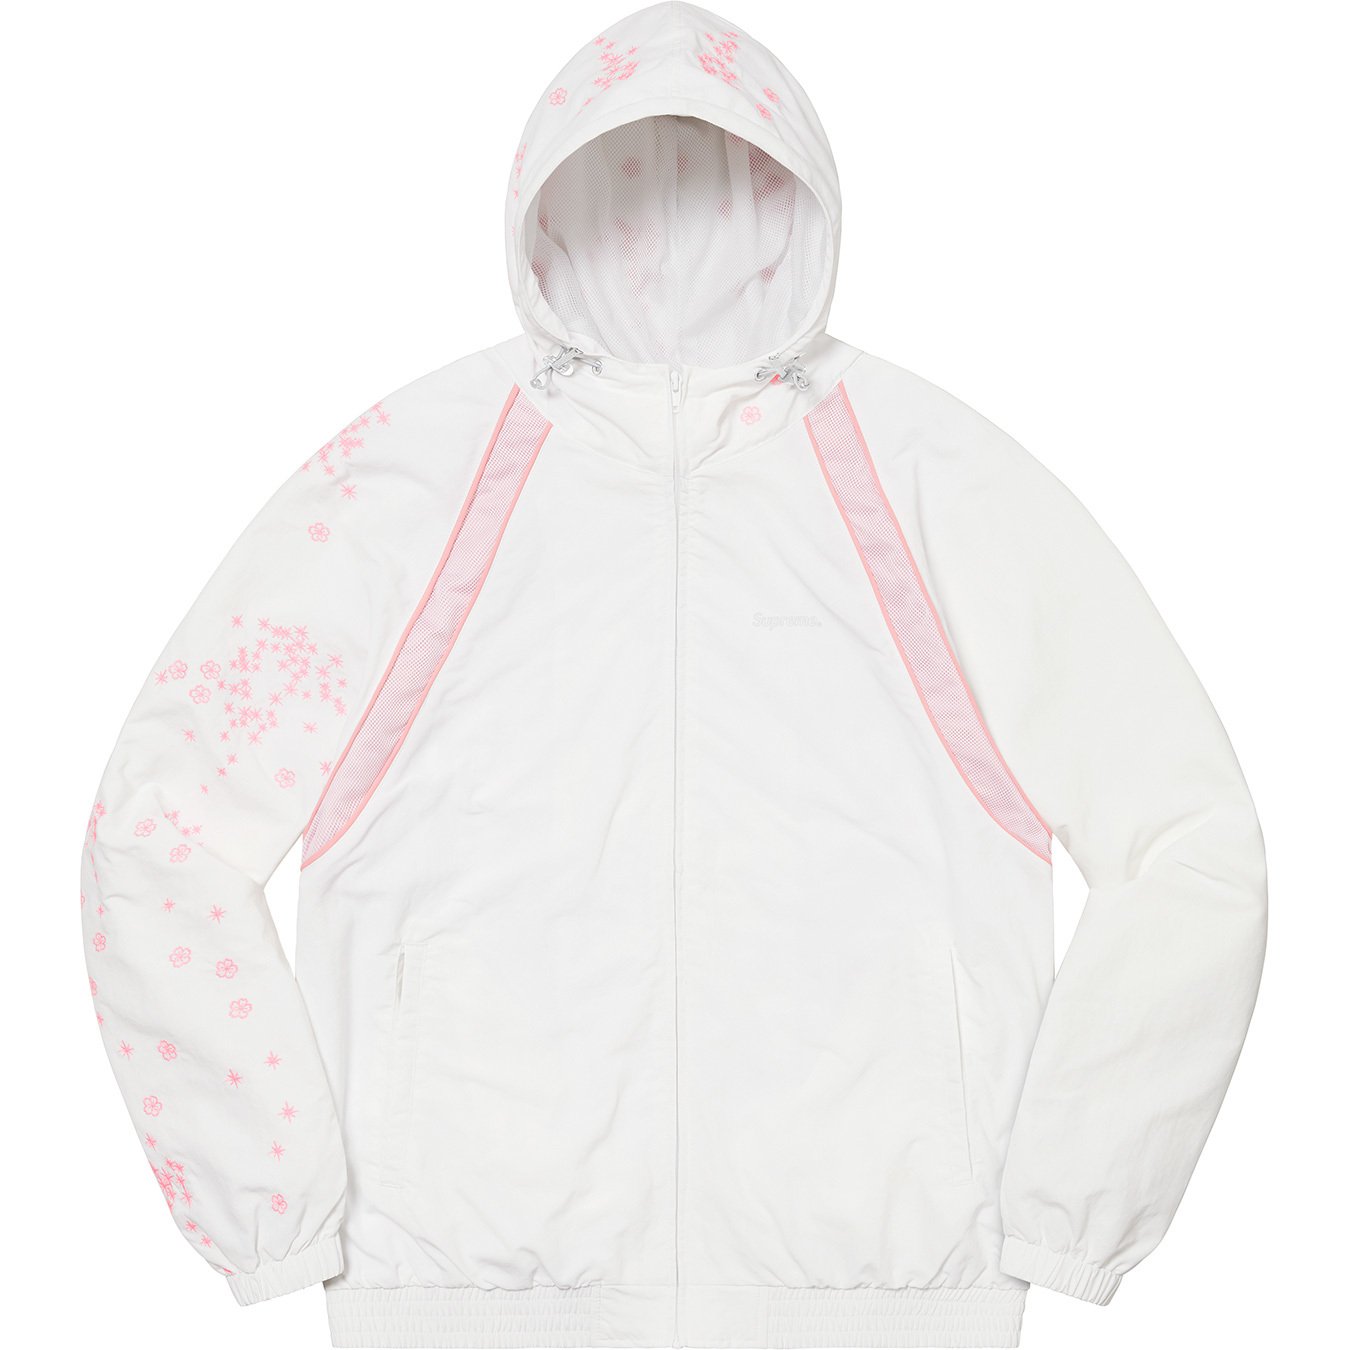 AOI Glow in the Dark Track Jacket   spring summer    Supreme